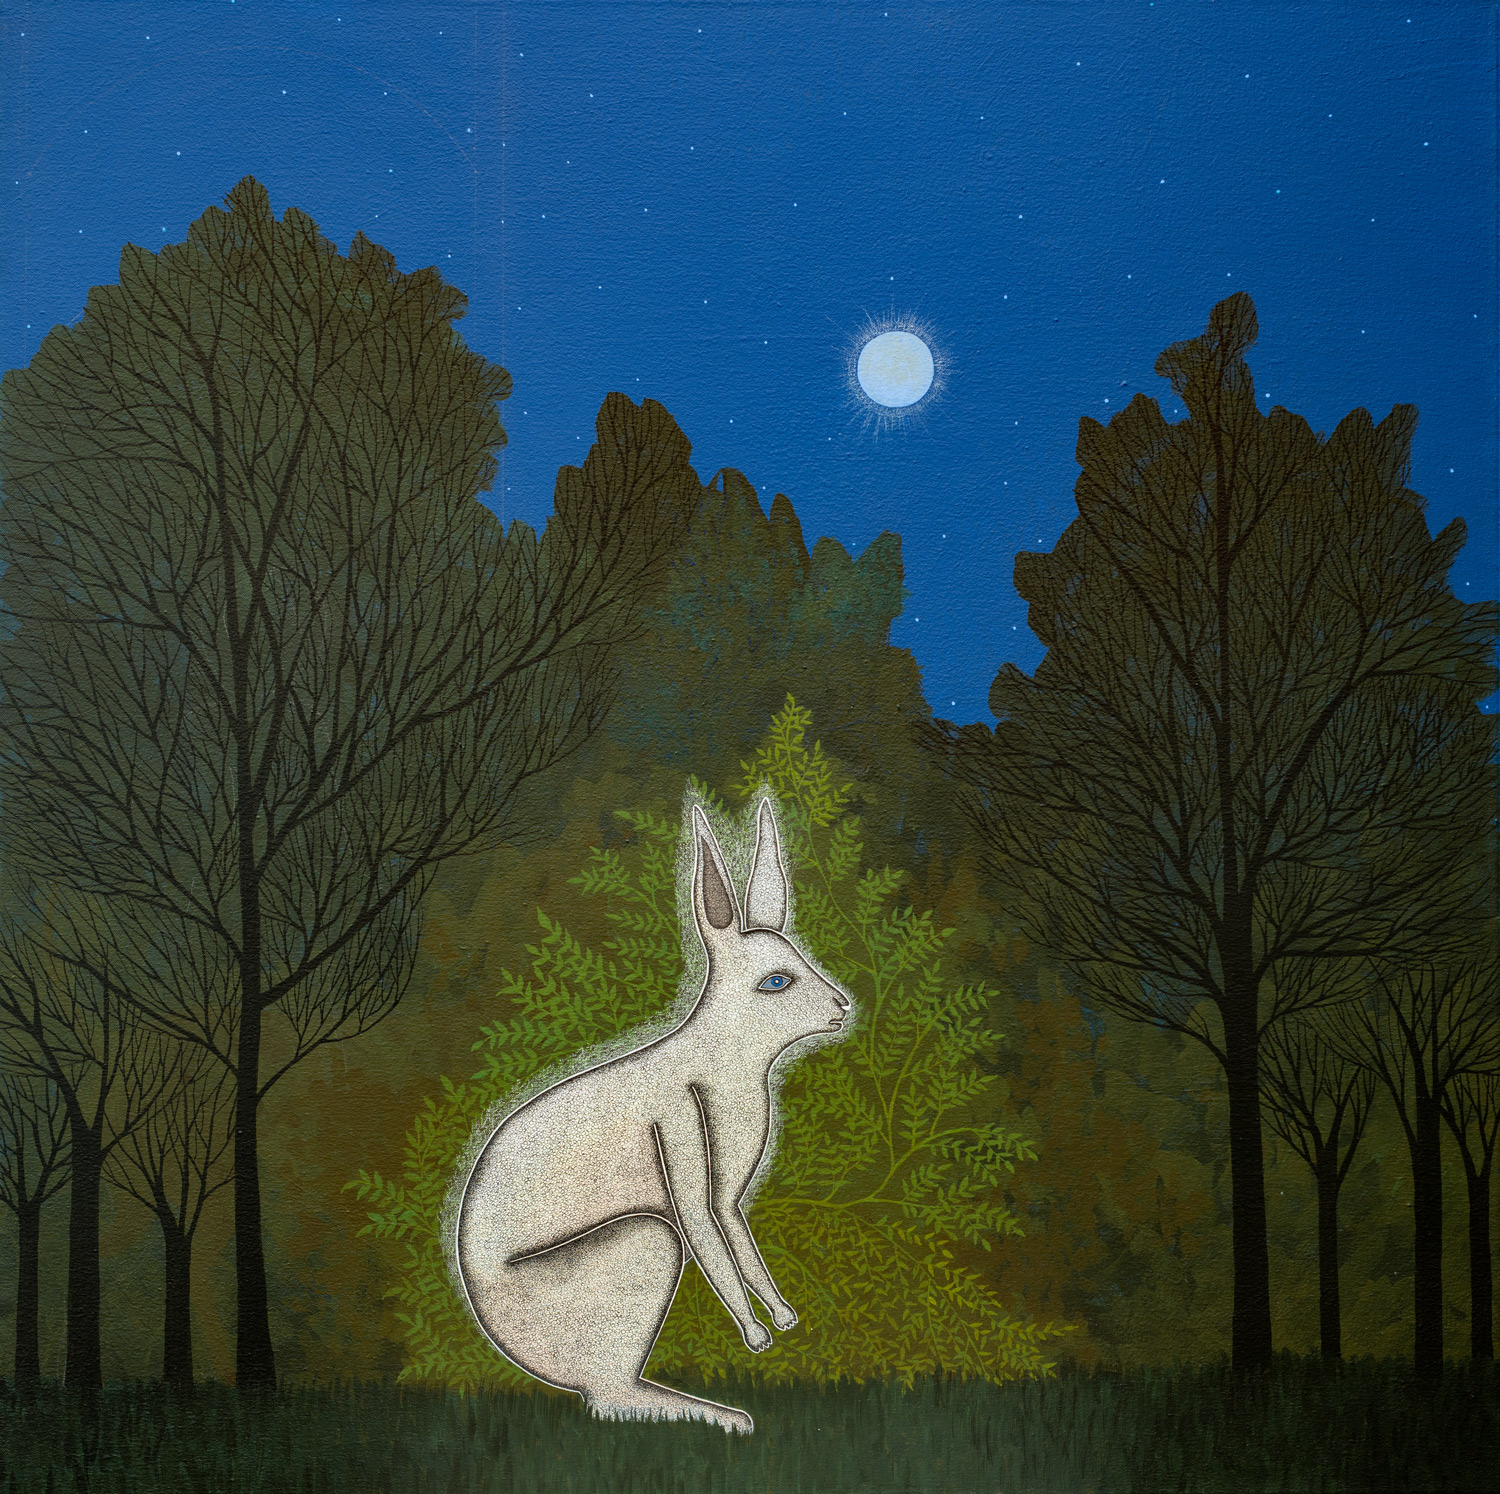 Moonstruck 80 x 80 cm Acrylic and pen on canvas-In private collection